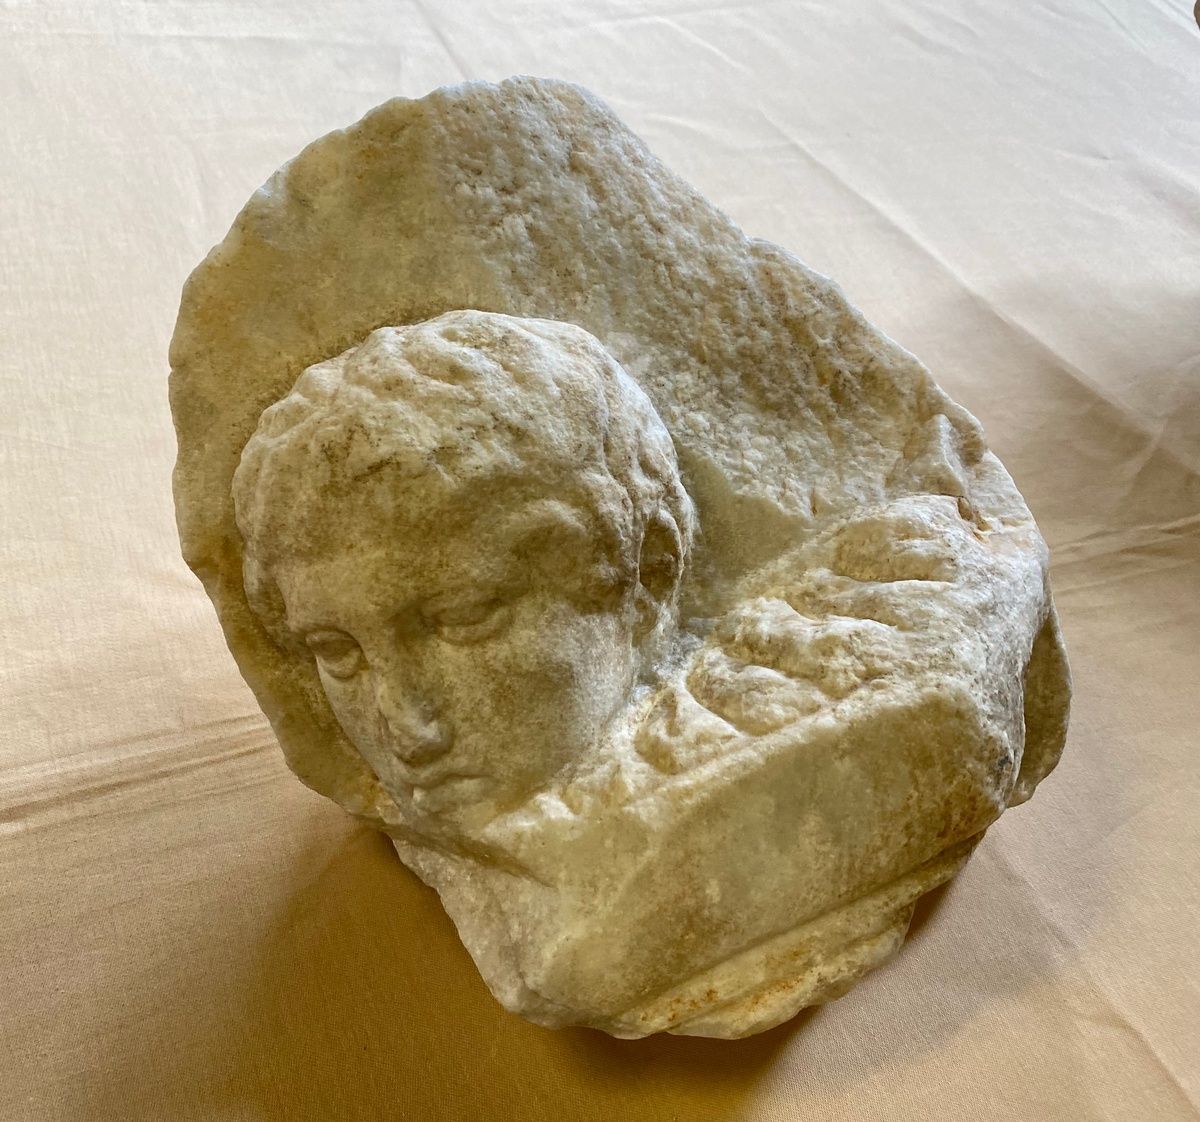 One of the Parthenon fragments from the Vatican at the Acropolis Museum. Photo source: Ministry of Culture